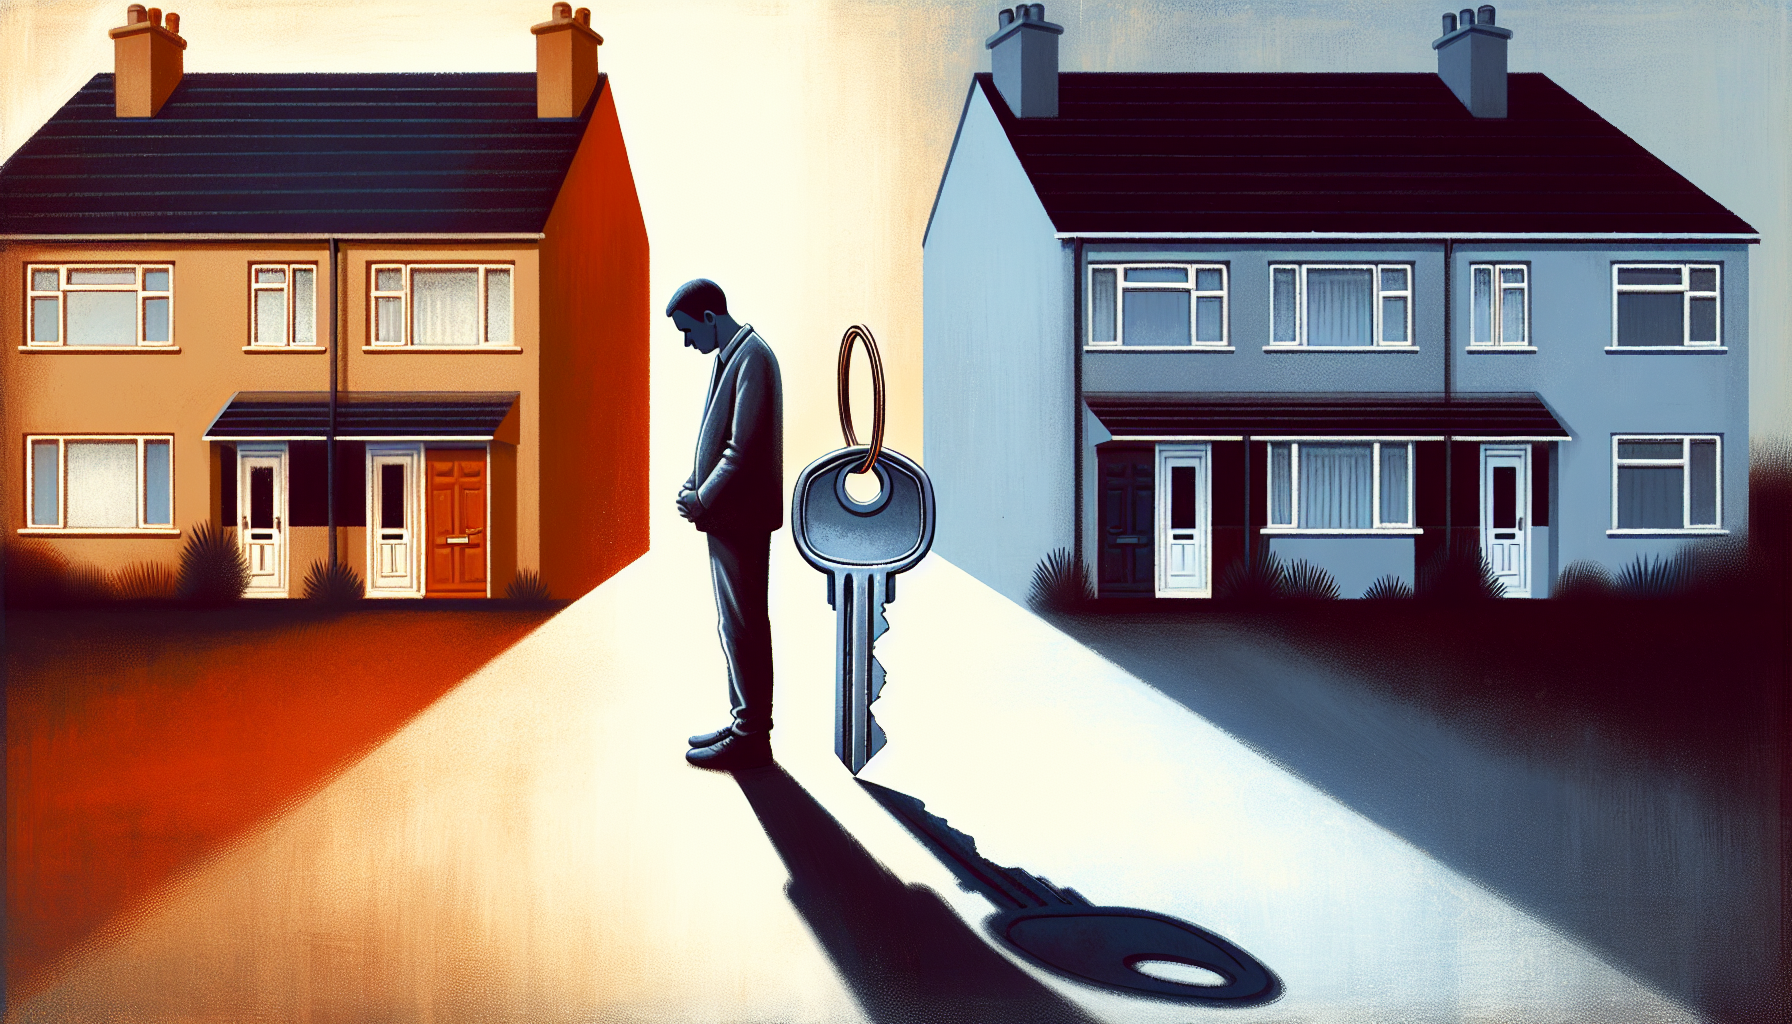 Illustration of a person holding house keys, symbolizing property ownership and eviction